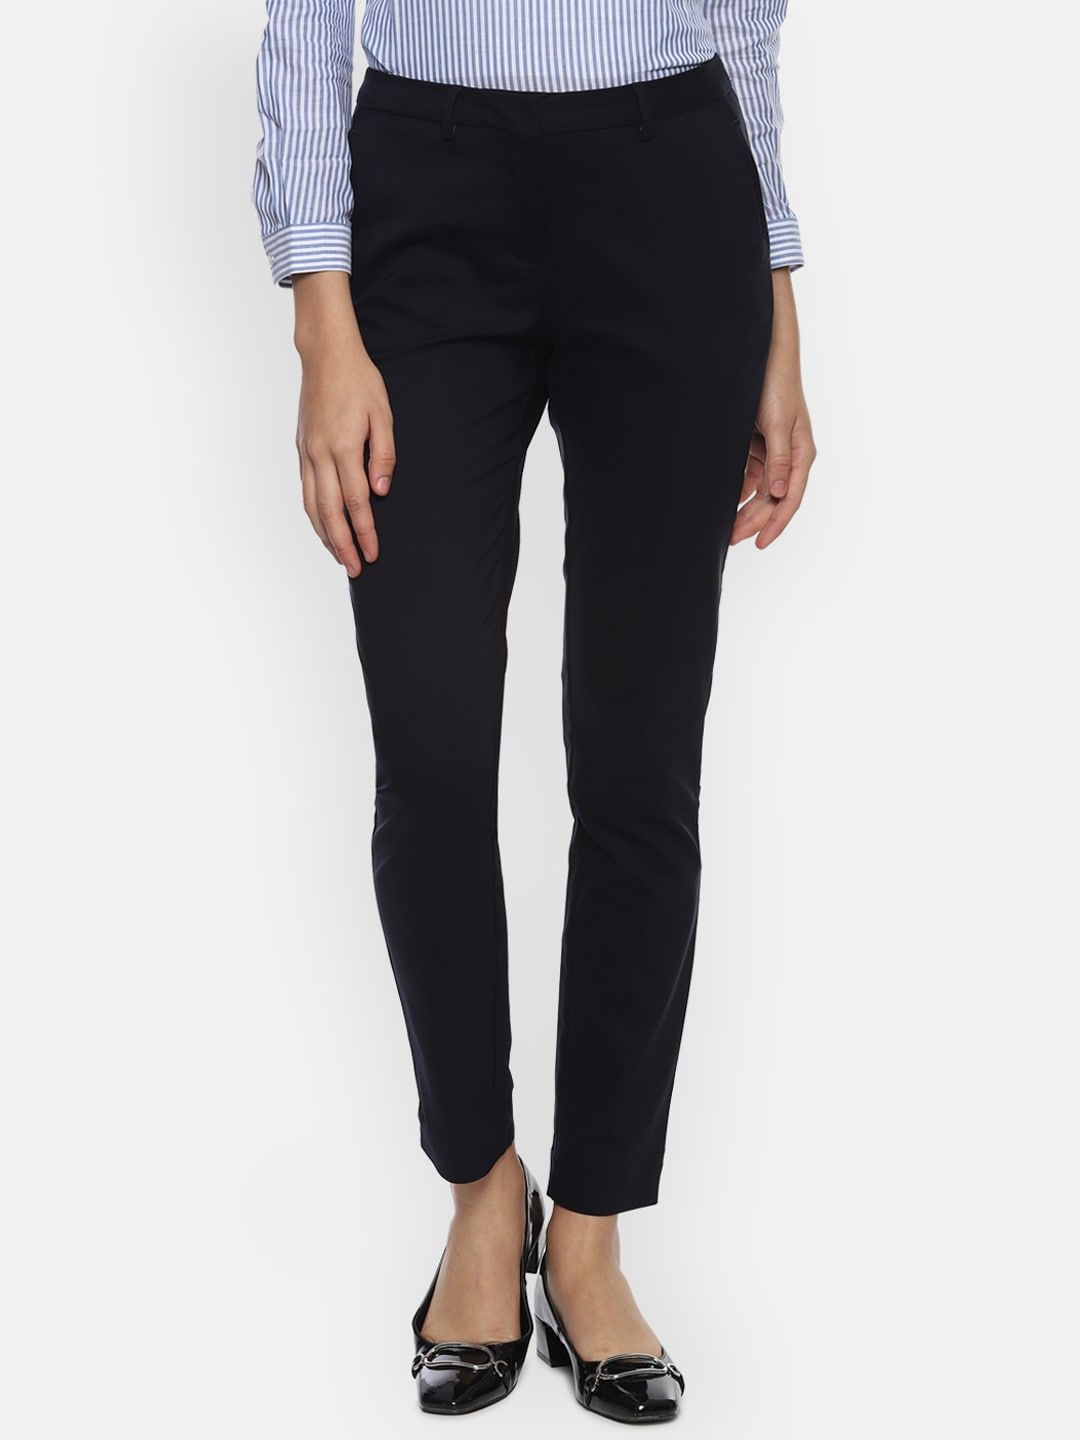 Allen Solly Woman Black Formal Trousers Price in India